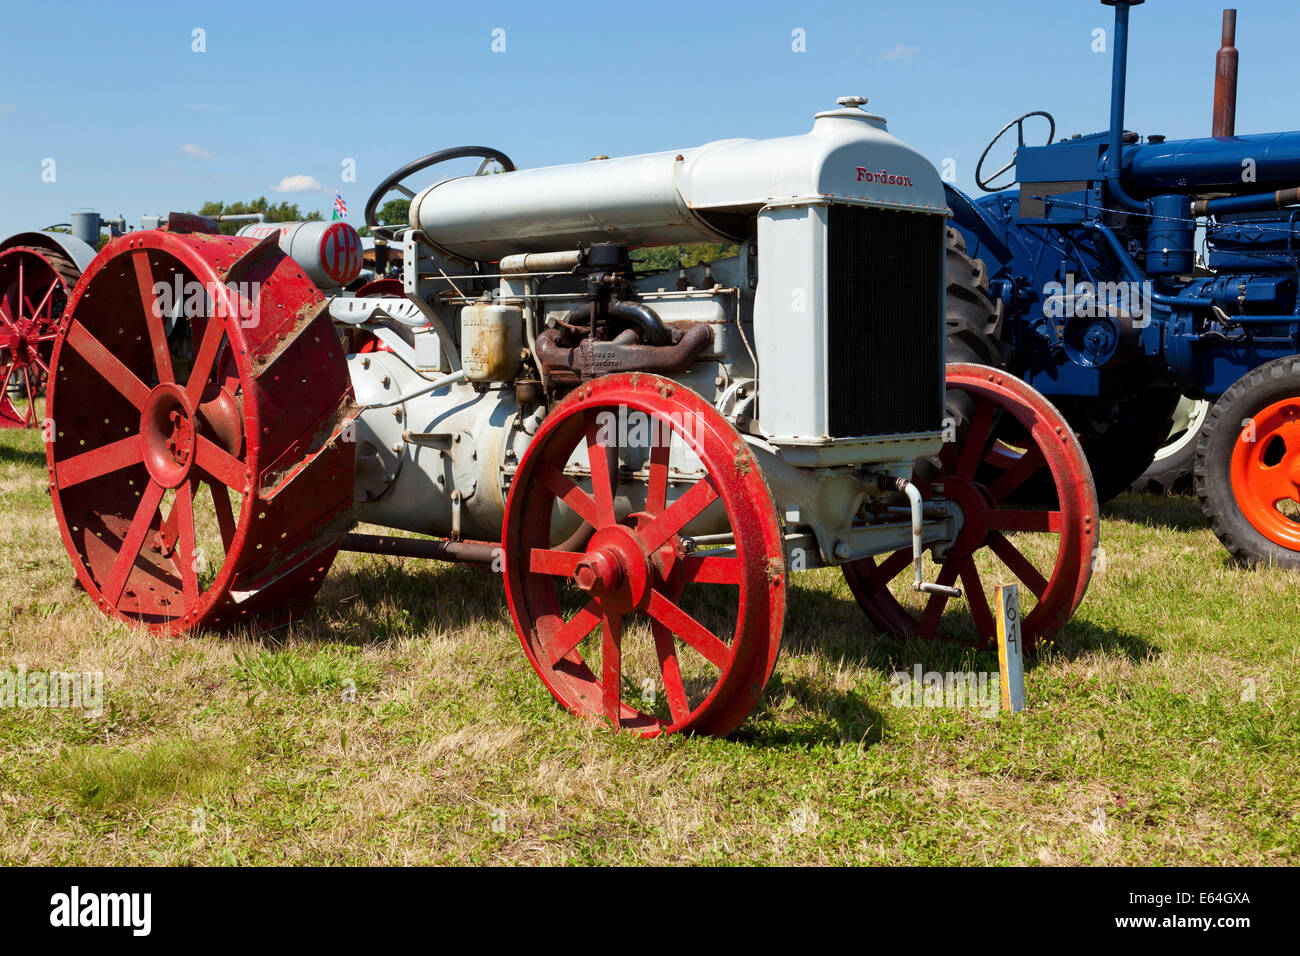 Fordson tractor on display at a country fair show Stock Photo